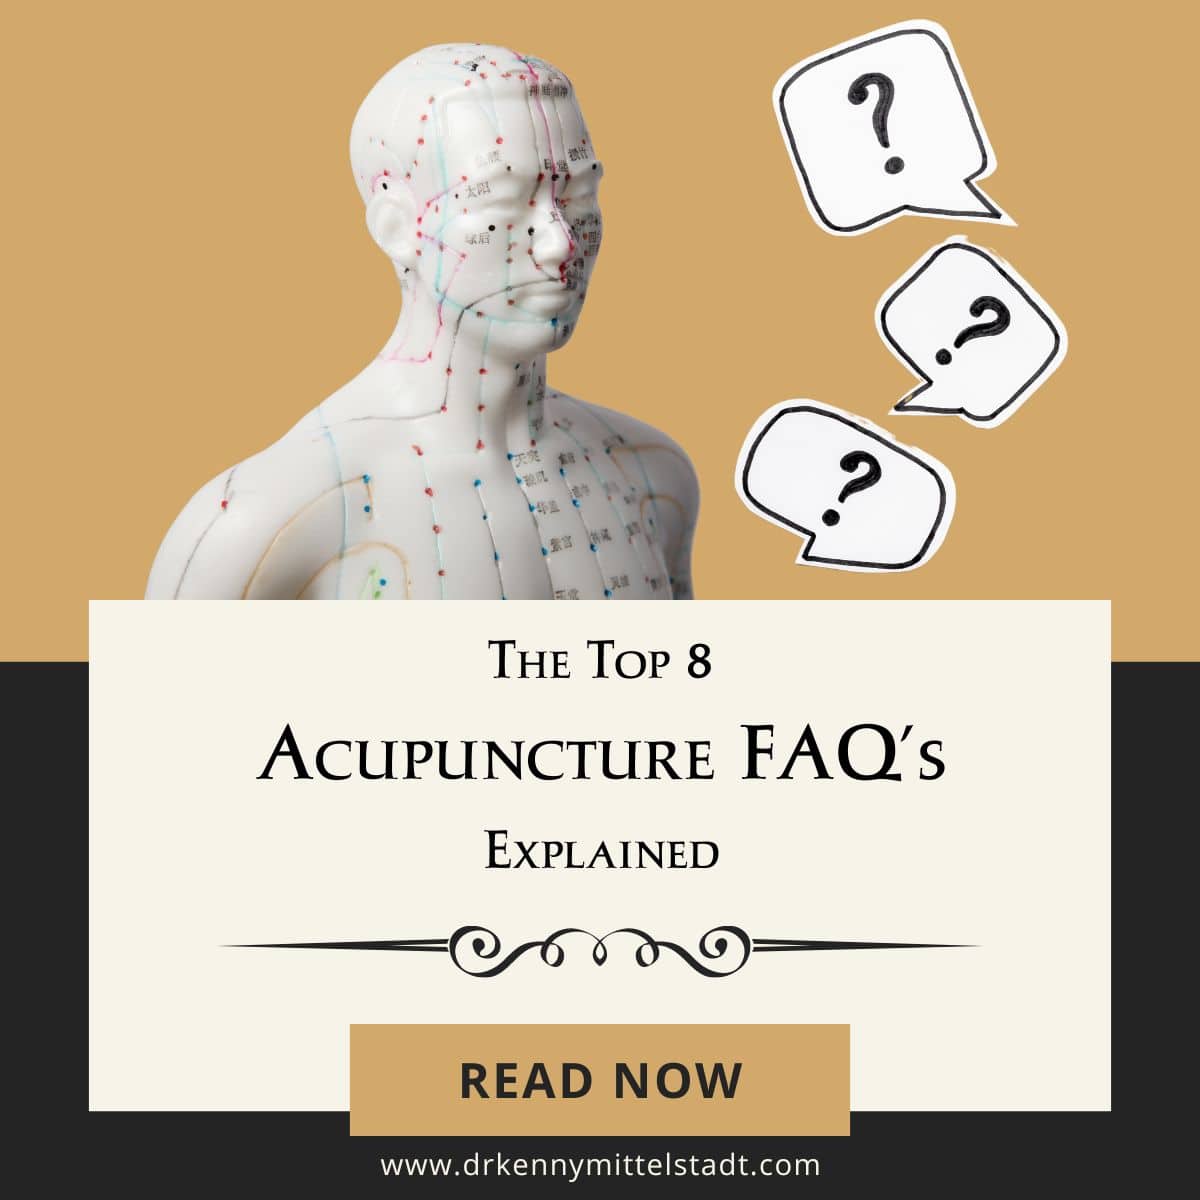 This is the featured image for the blog post, "The Top 8 Acupuncture FAQ's Explained." IT displays the title with a picture of an figure with the acupuncture meridians and points labeled.